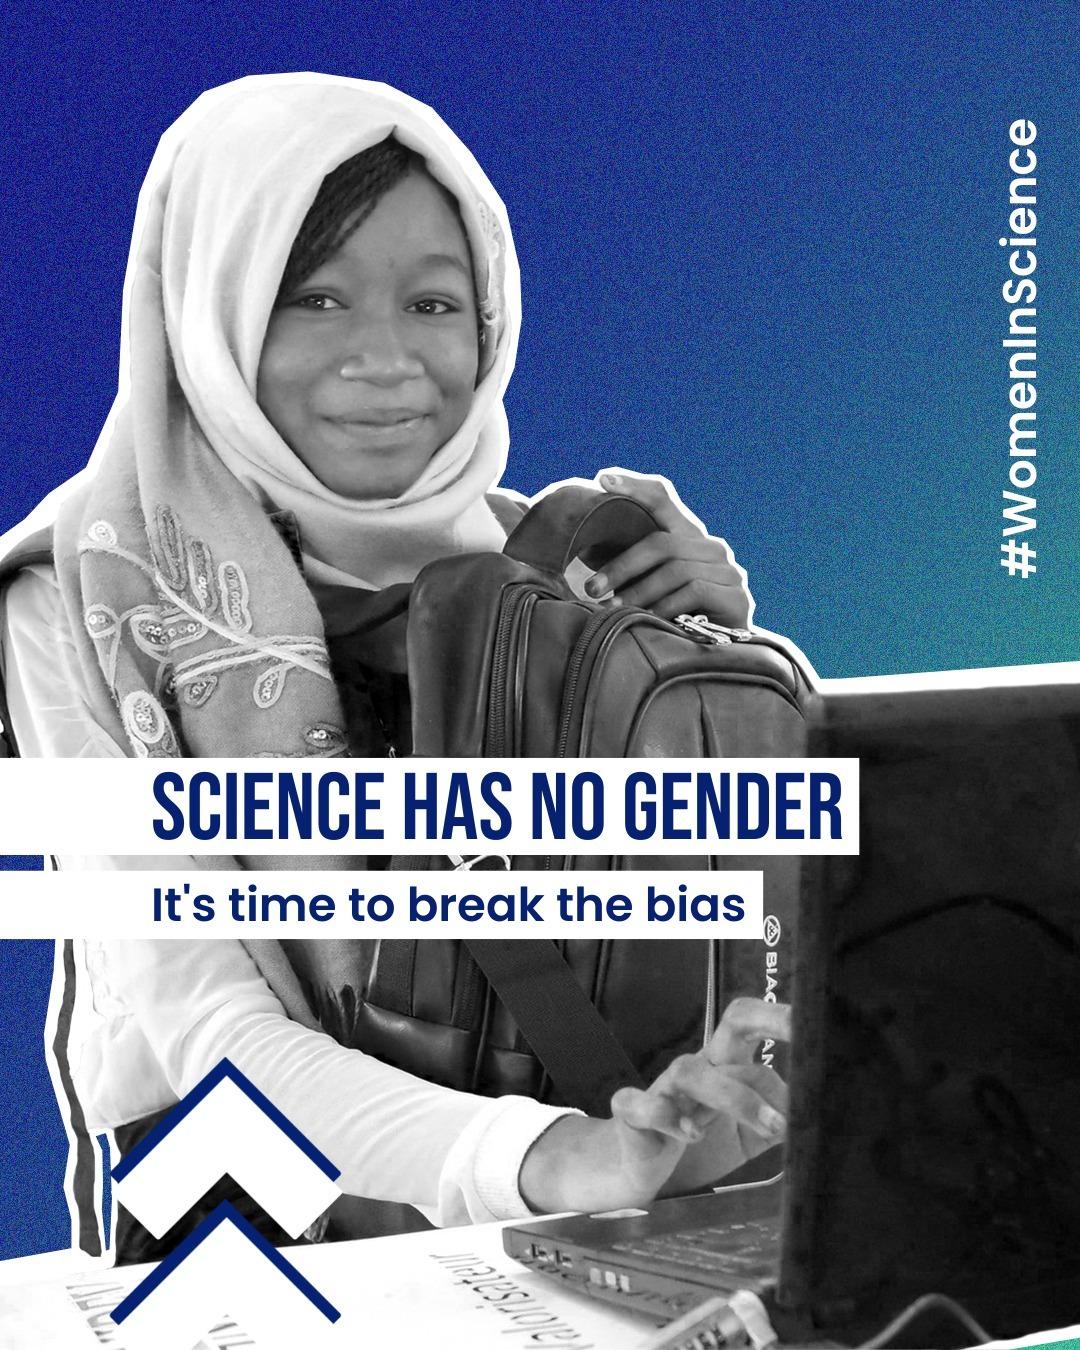 class="content__text"
 The world needs more #WomenInScience!

Let's smash harmful stereotypes and celebrate all women and girls who defy the status quo!

 #TransformingEducation 
 